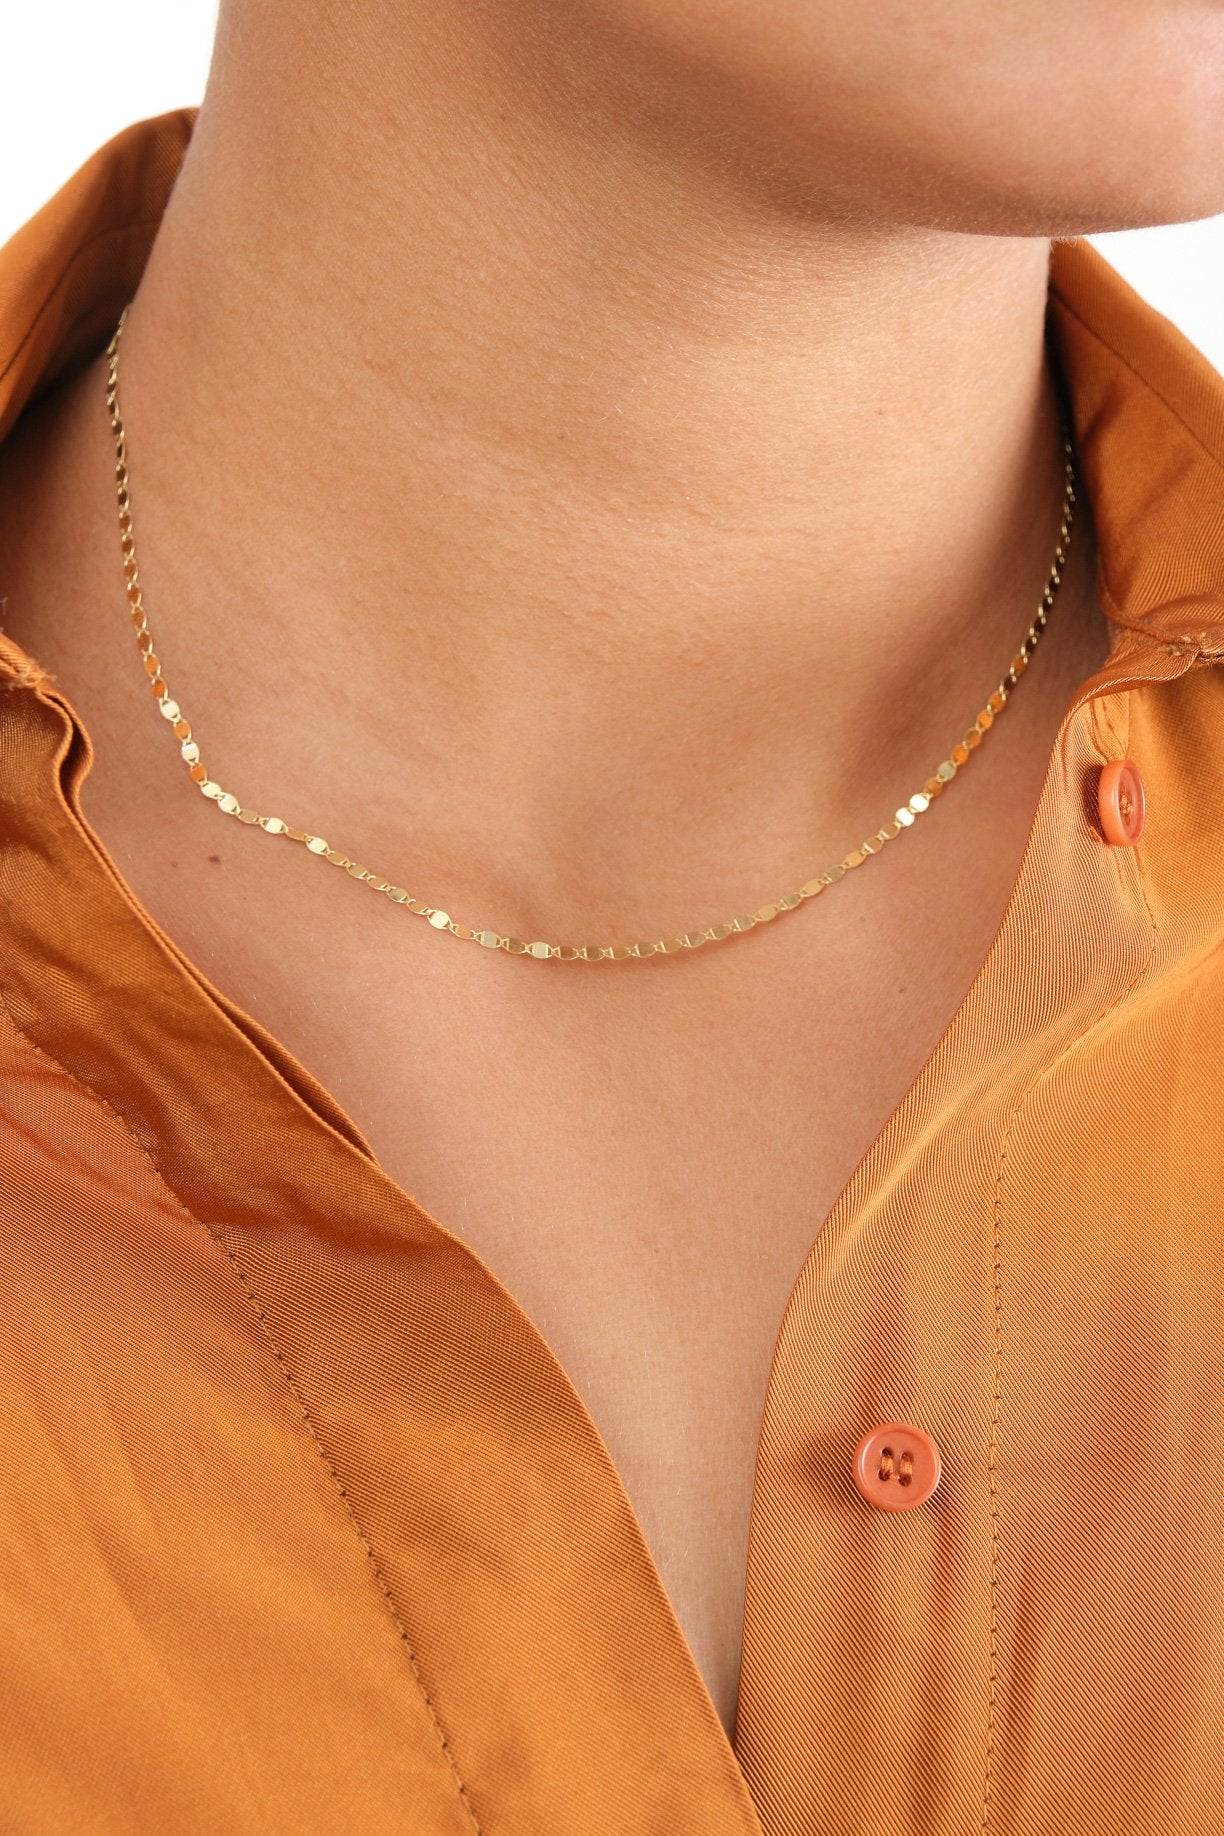 Carrie Hoffman Flat Oval Disc Necklace in 14k Gold 